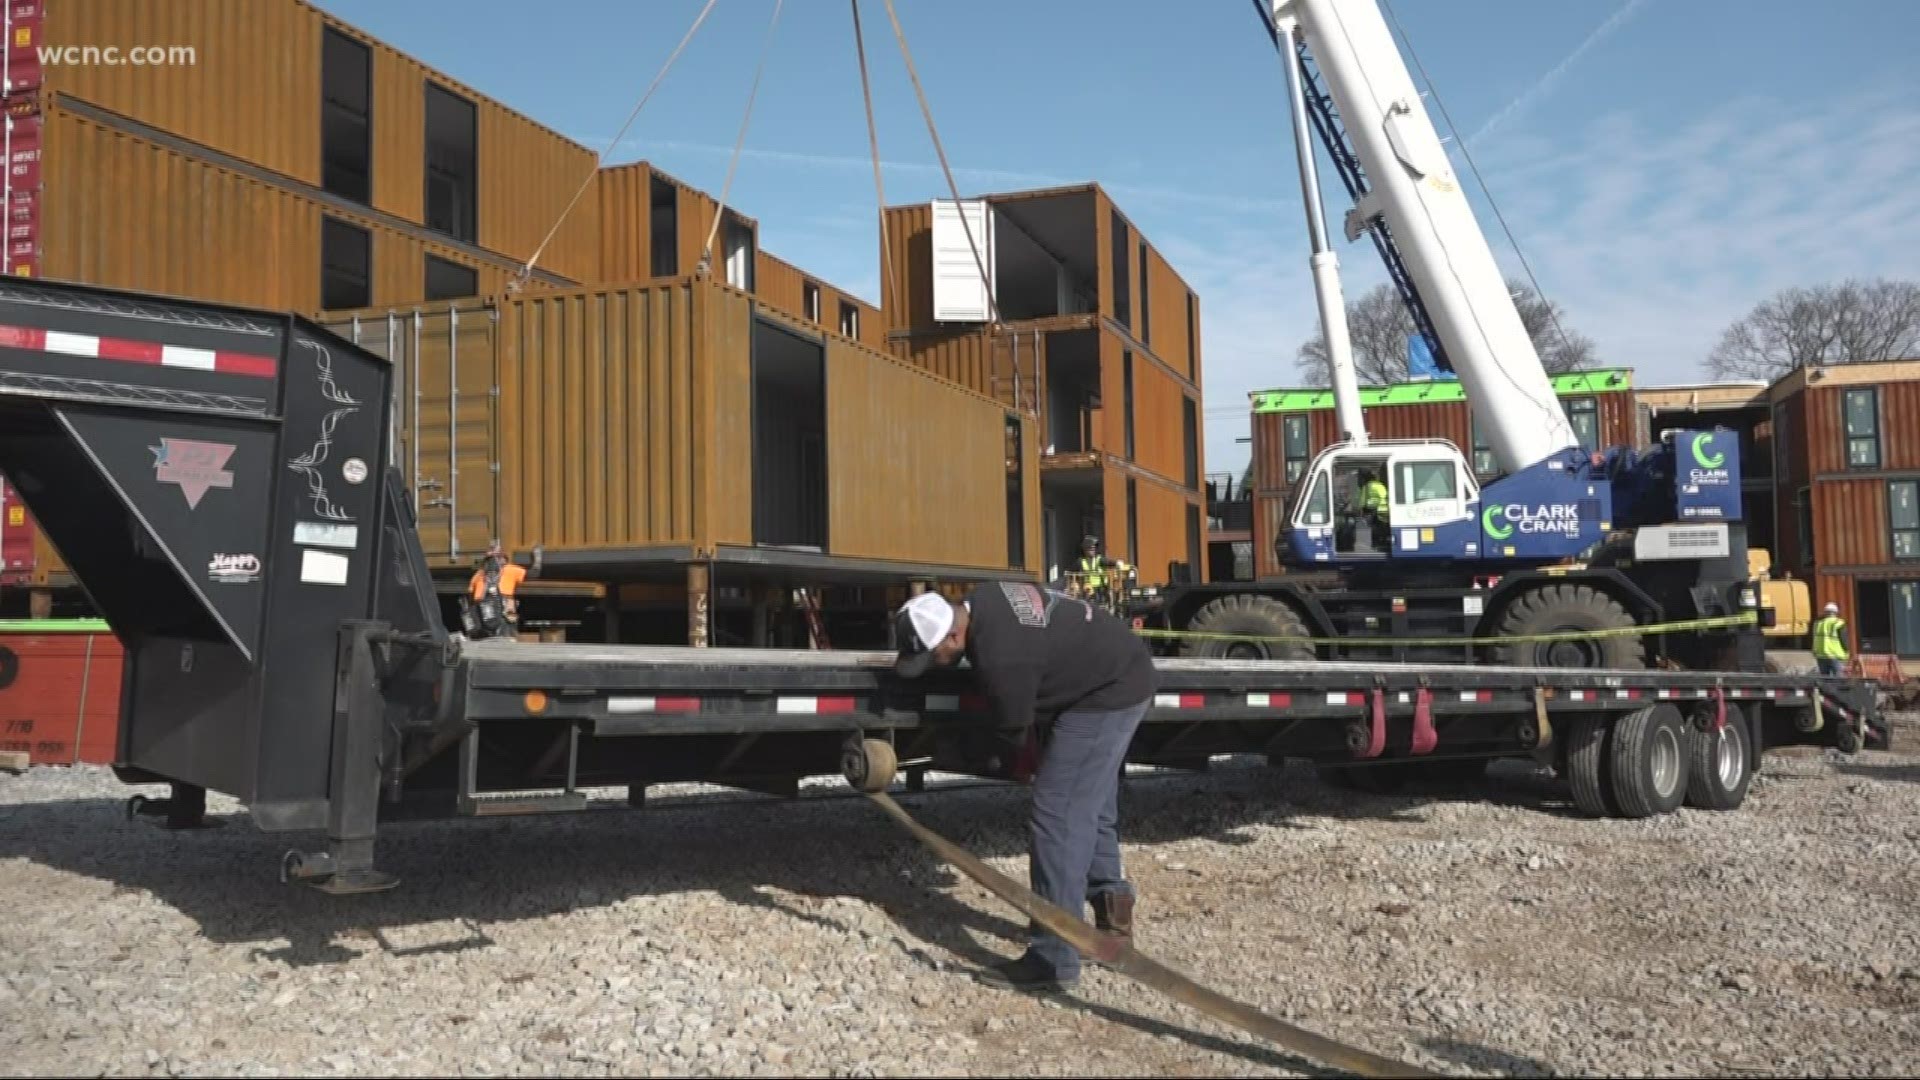 An 83-unit complex made of steel containers is nearing completion in an up-and-coming Nashville neighborhood. The project includes smaller units at reduced rent.